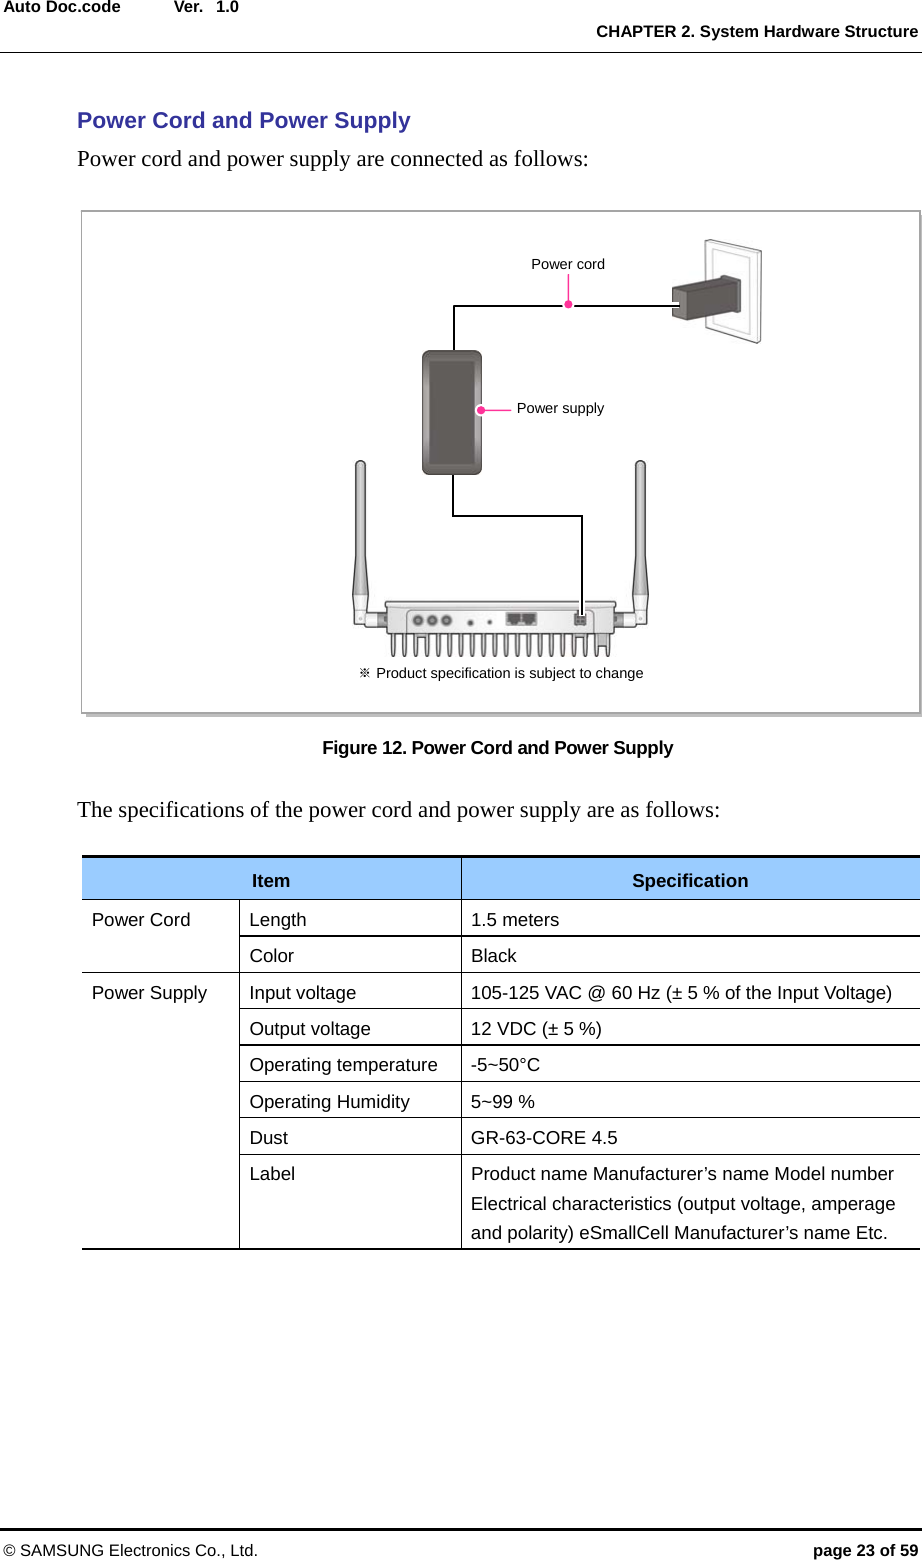  Ver.  CHAPTER 2. System Hardware Structure © SAMSUNG Electronics Co., Ltd.  page 23 of 59 Auto Doc.code  1.0 Power Cord and Power Supply Power cord and power supply are connected as follows:  Figure 12. Power Cord and Power Supply  The specifications of the power cord and power supply are as follows:  Item  Specification Power Cord  Length  1.5 meters Color Black Power Supply  Input voltage  105-125 VAC @ 60 Hz (± 5 % of the Input Voltage) Output voltage  12 VDC (± 5 %) Operating temperature  -5~50°C Operating Humidity  5~99 % Dust GR-63-CORE 4.5 Label  Product name Manufacturer’s name Model number Electrical characteristics (output voltage, amperage and polarity) eSmallCell Manufacturer’s name Etc.  ※ Product specification is subject to change Power cord Power supply 